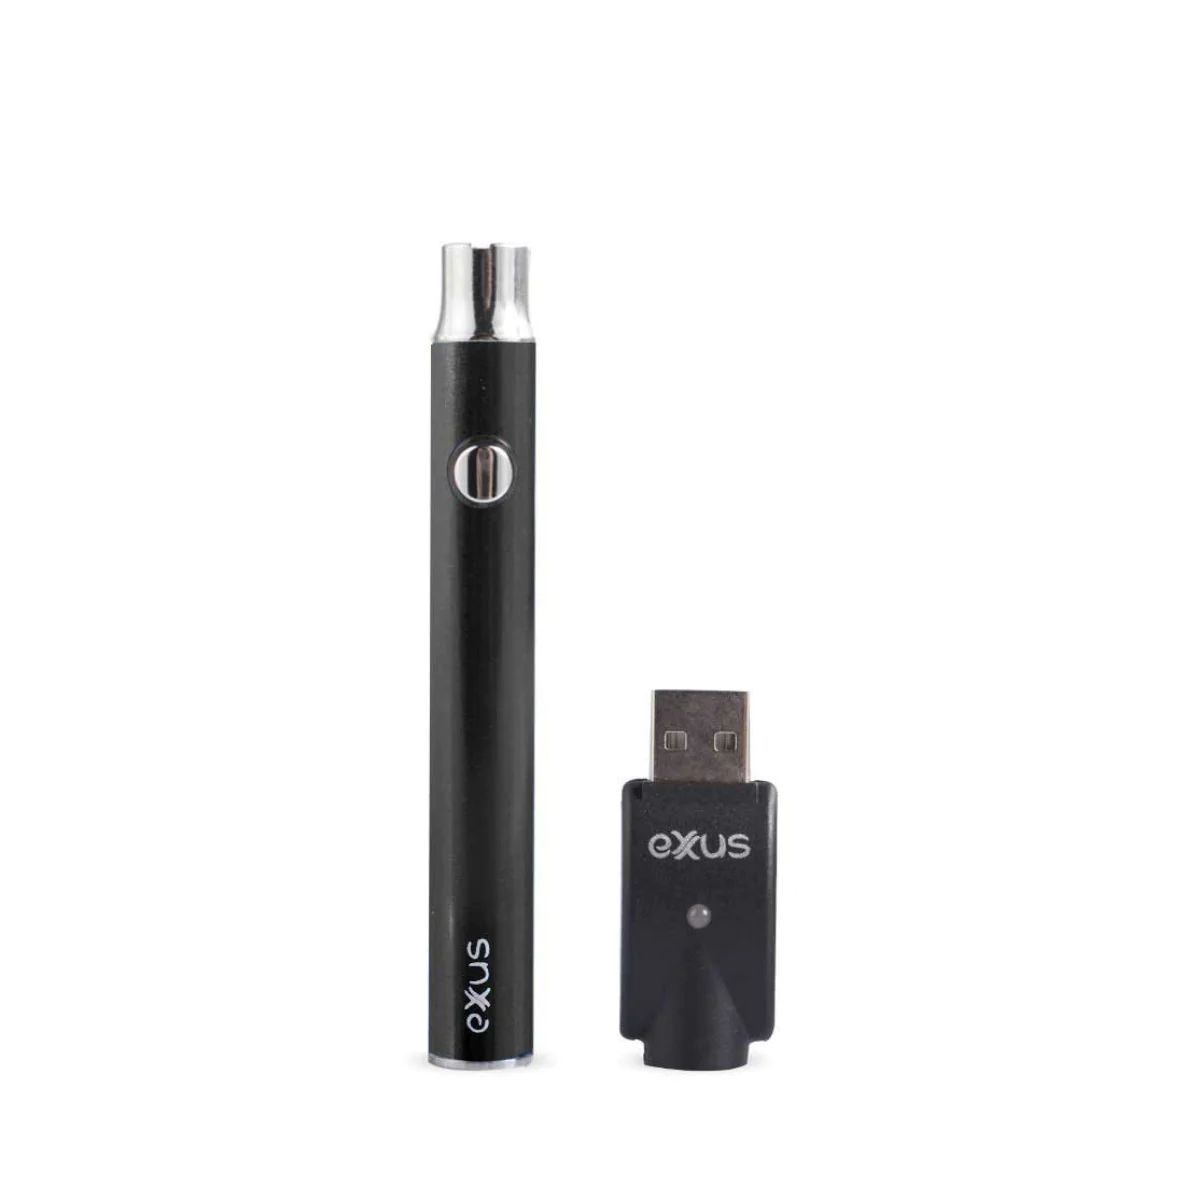 Cartridge Vaporizers By One Stoppipe Shop-Comprehensive Review Top Cartridge Vaporizers Unveiled